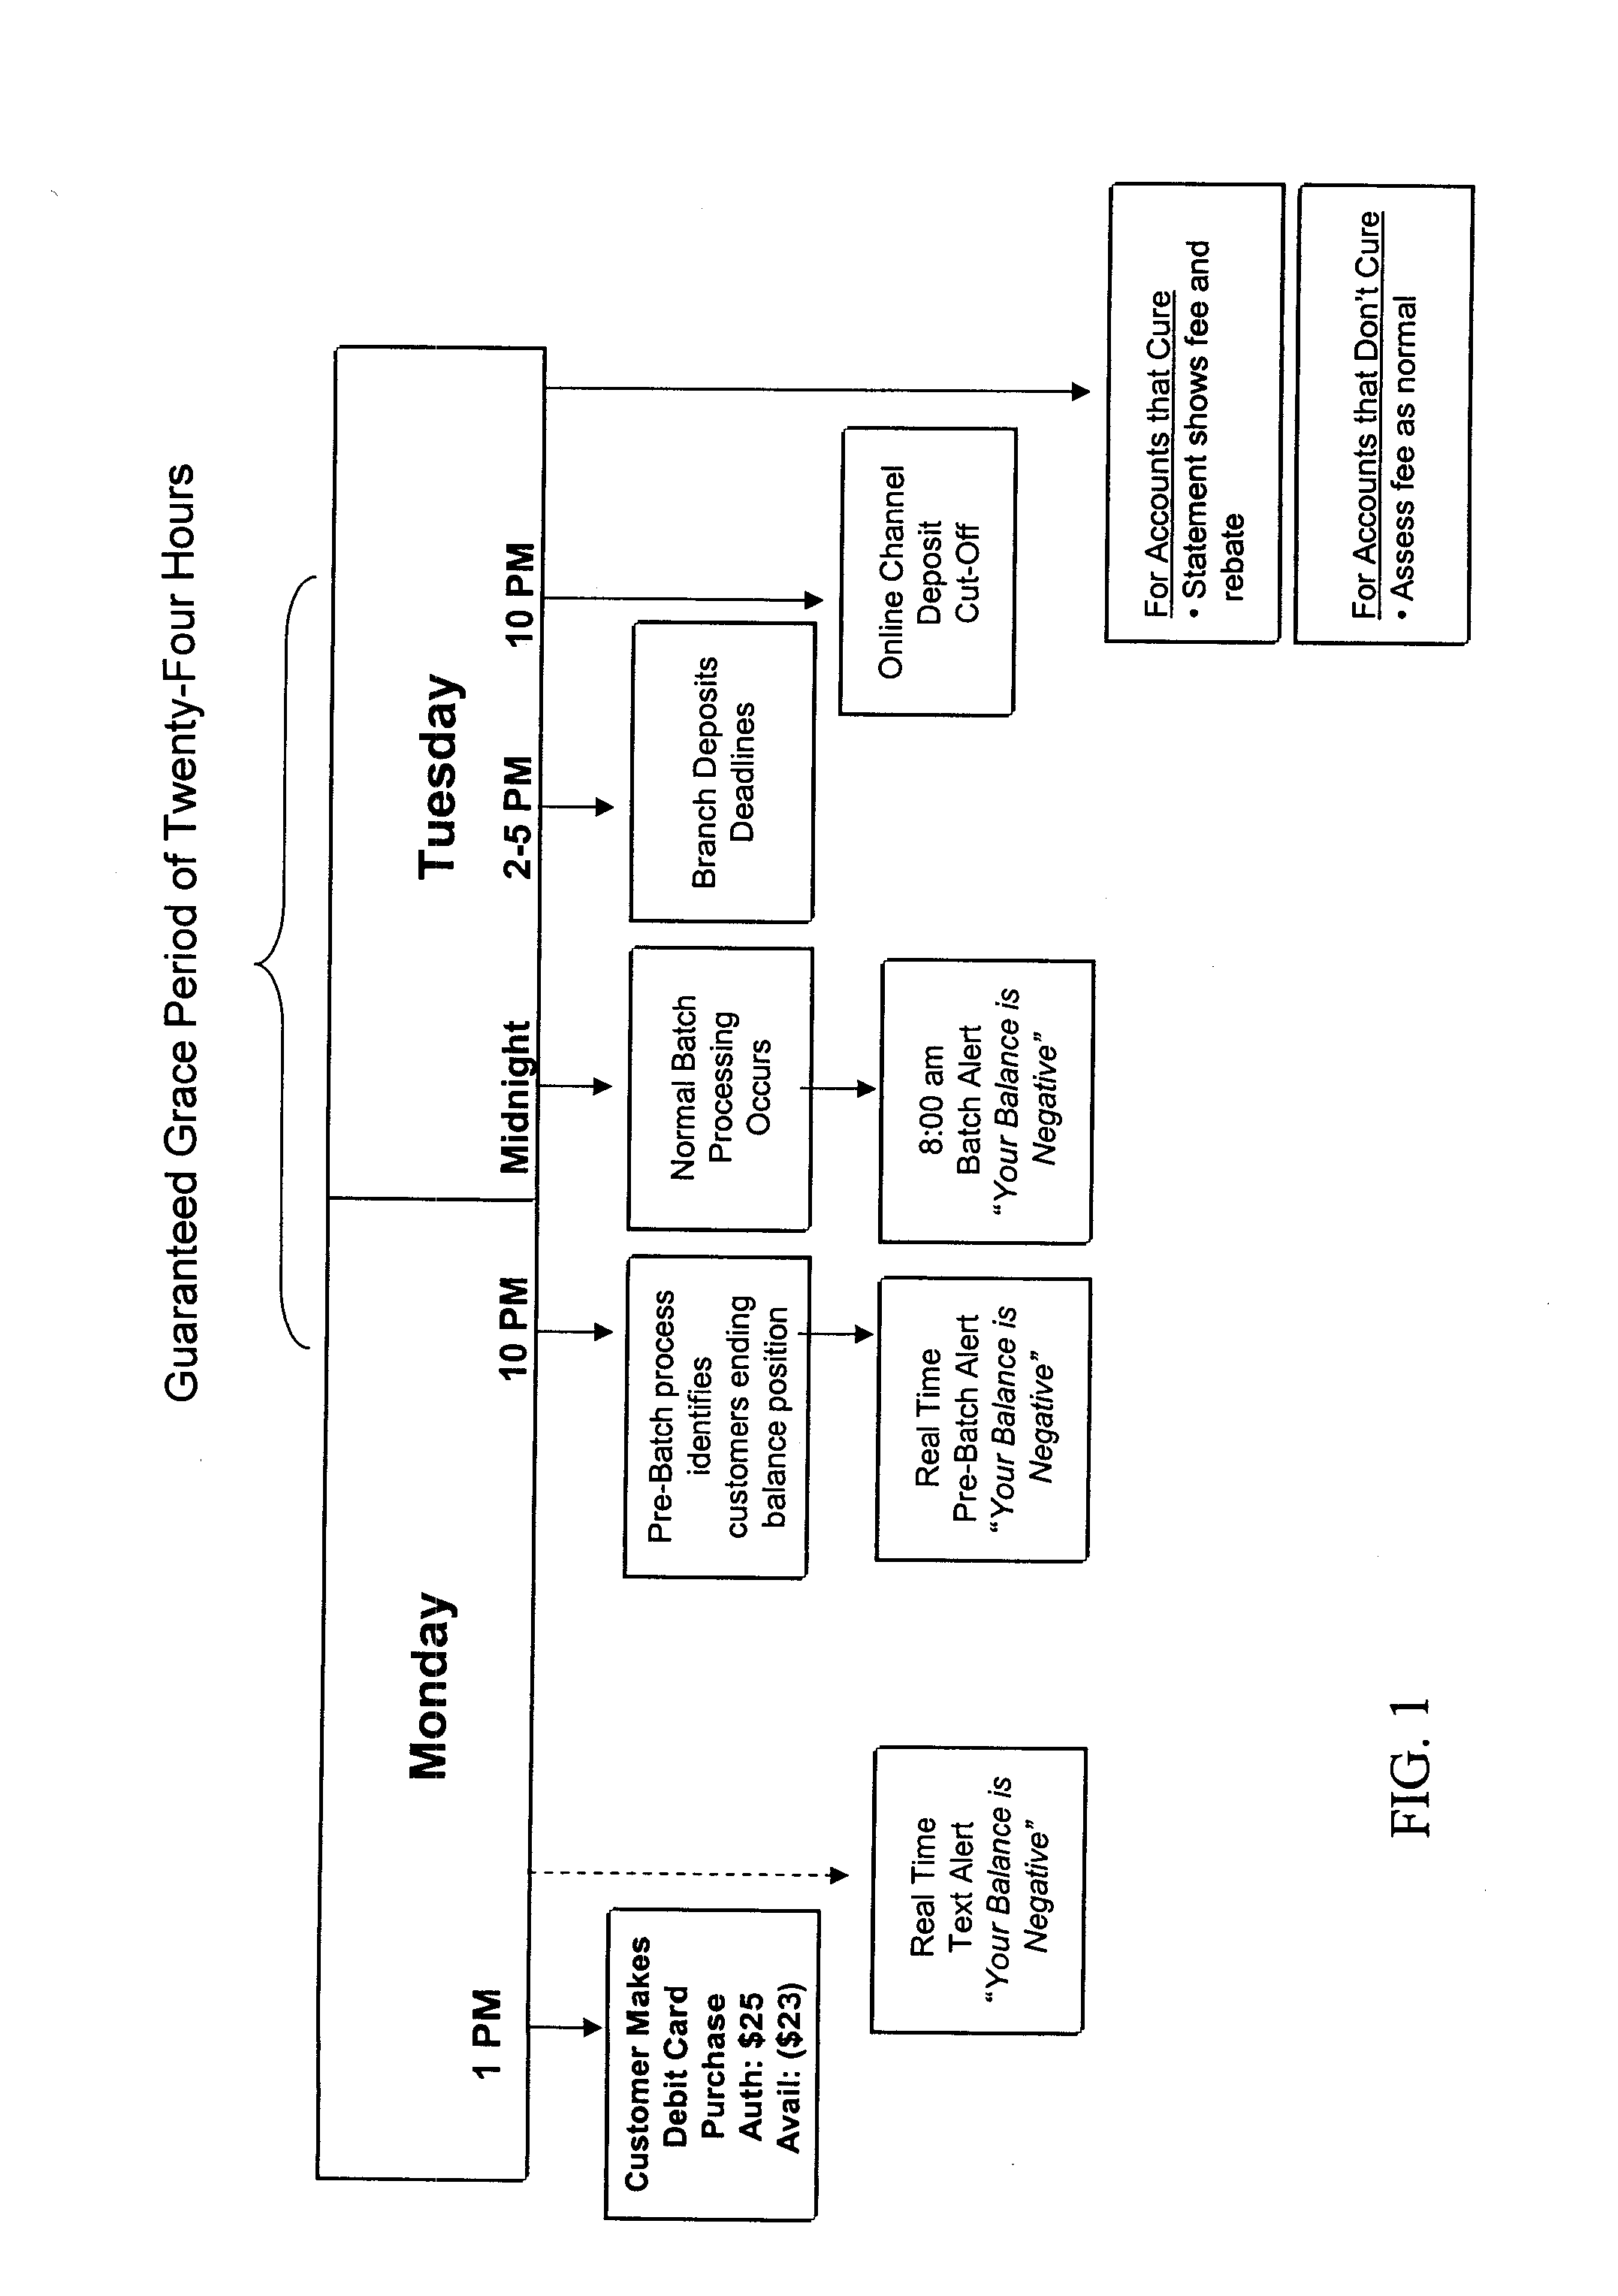 System and method for providing time to cure negative balances in financial accounts while encouraging rapid curing of those balances to a positive net position